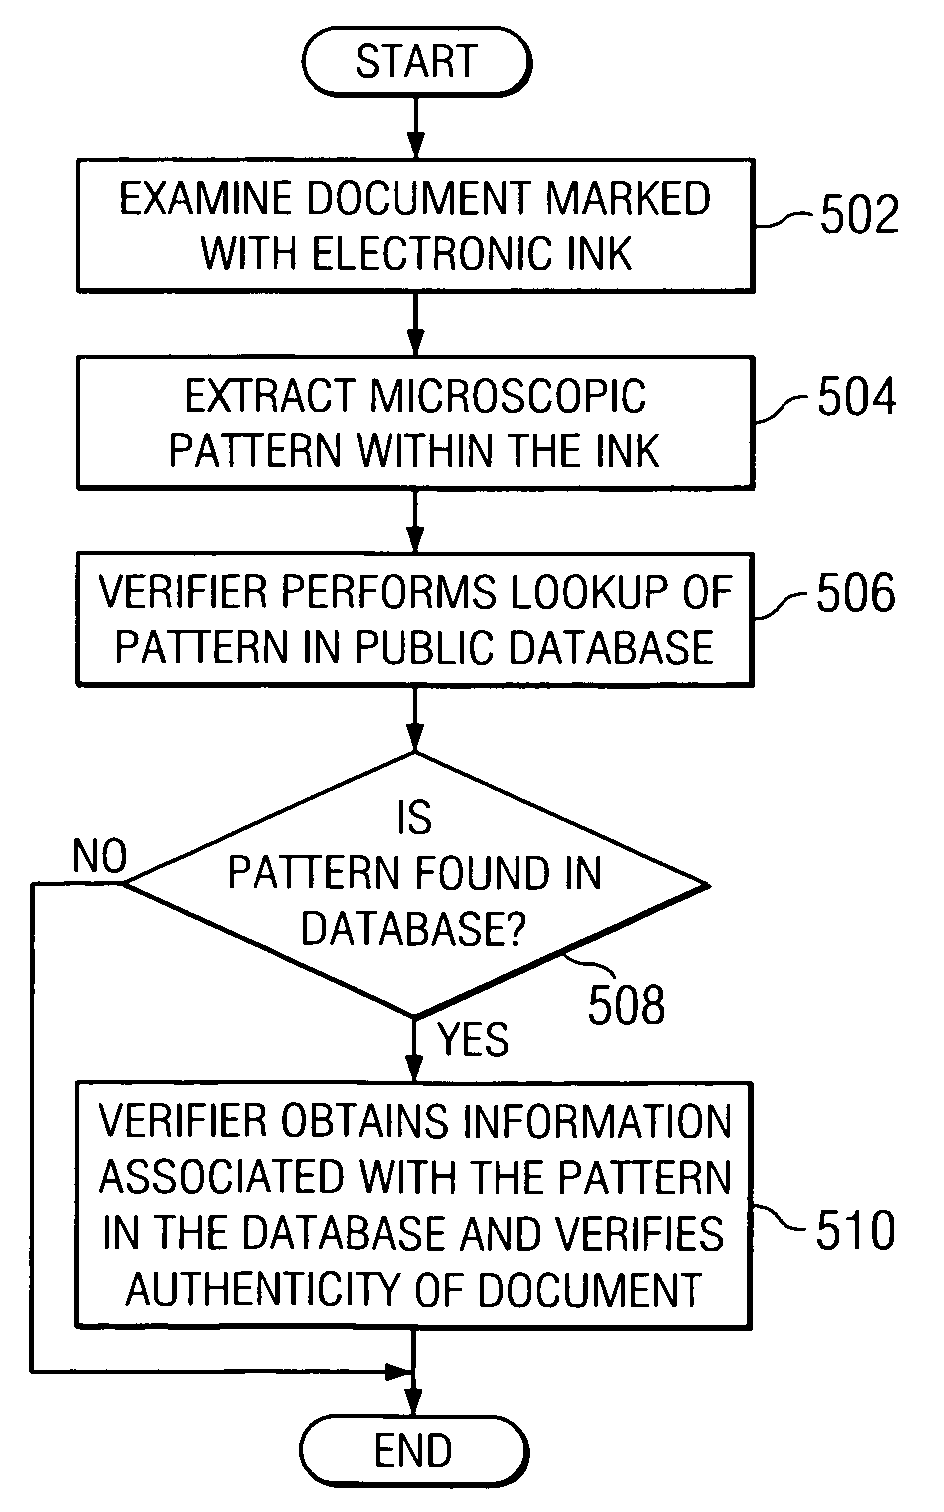 Mechanism for storing authenticity information about a written or printed document